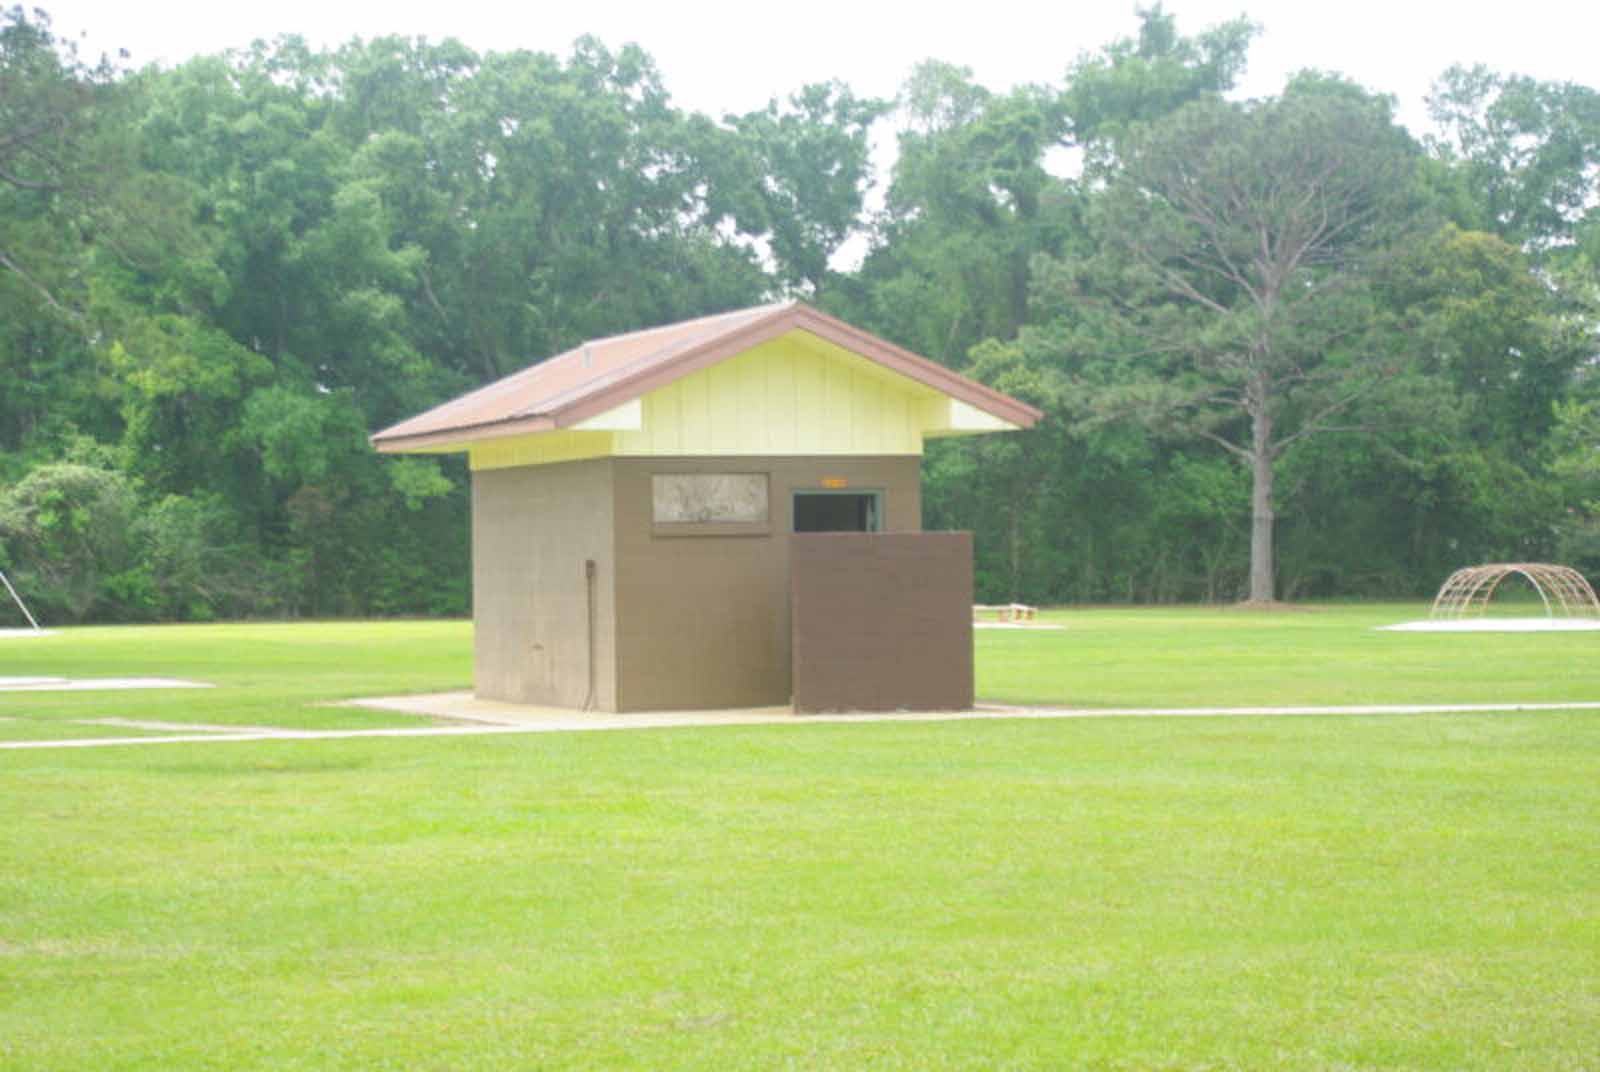 New Bathroom Facility Approved For Beulah Heights Park In Foley